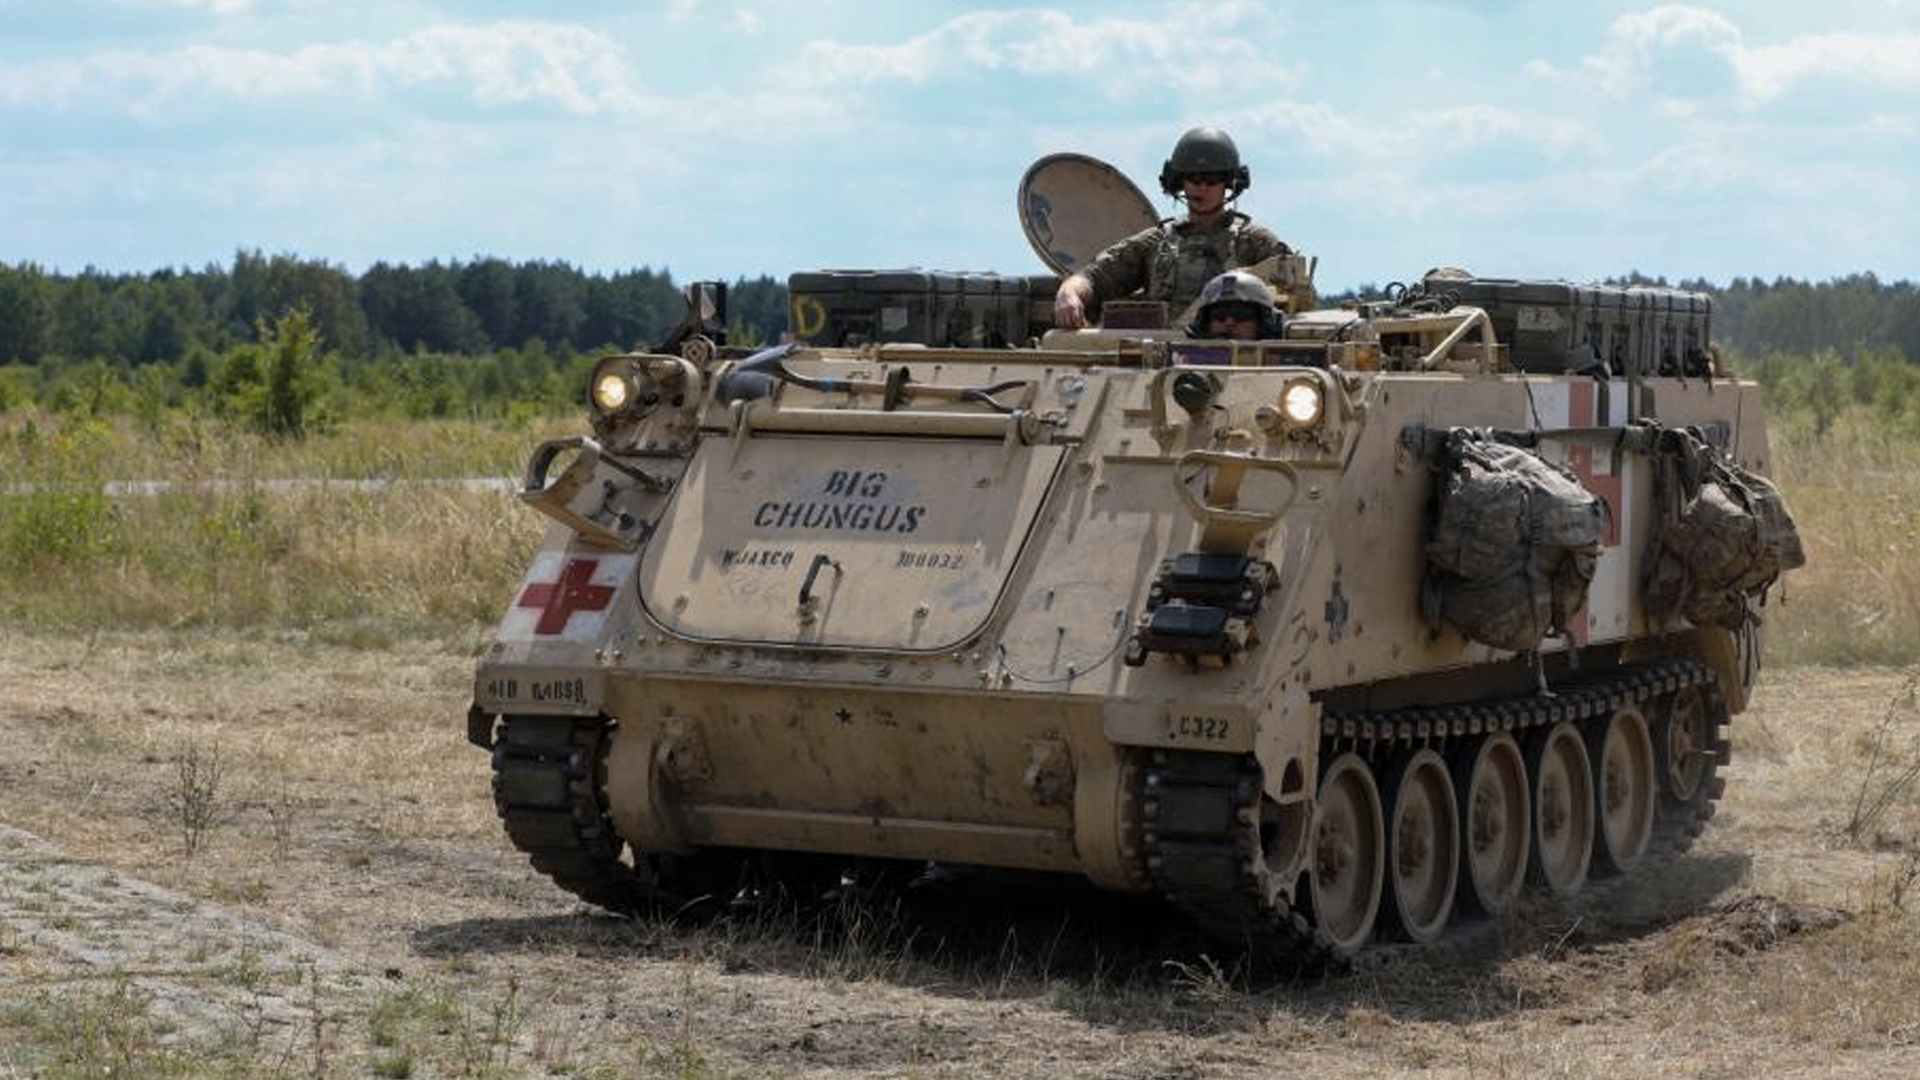 Soldiers named their M113 APC ‘Big Chungus’ because why the hell not